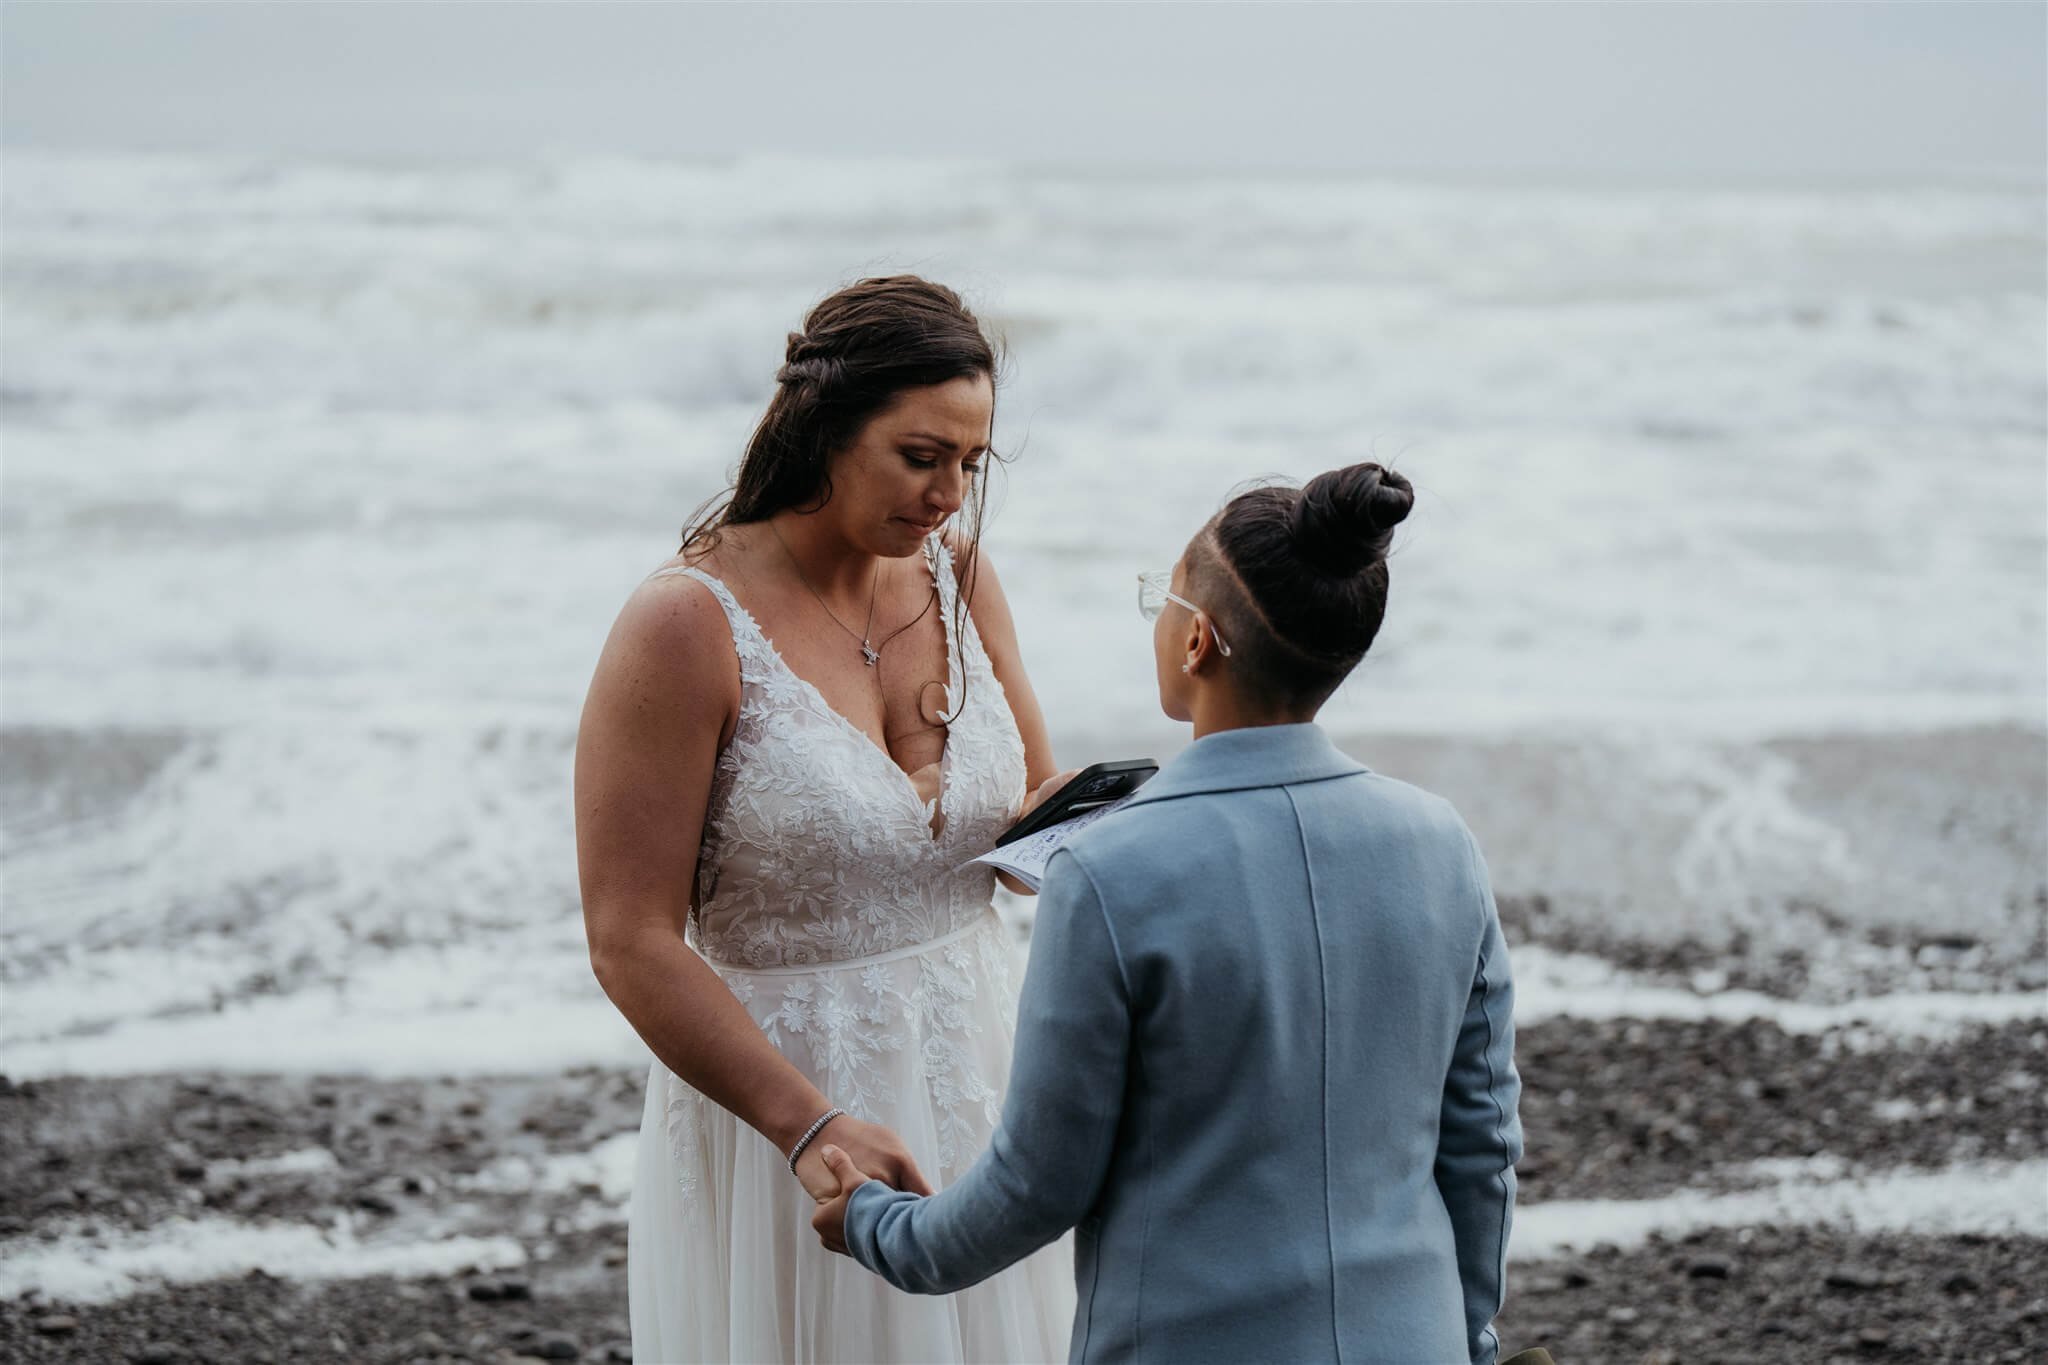 Brides exchange private vows at Ruby Beach elopement